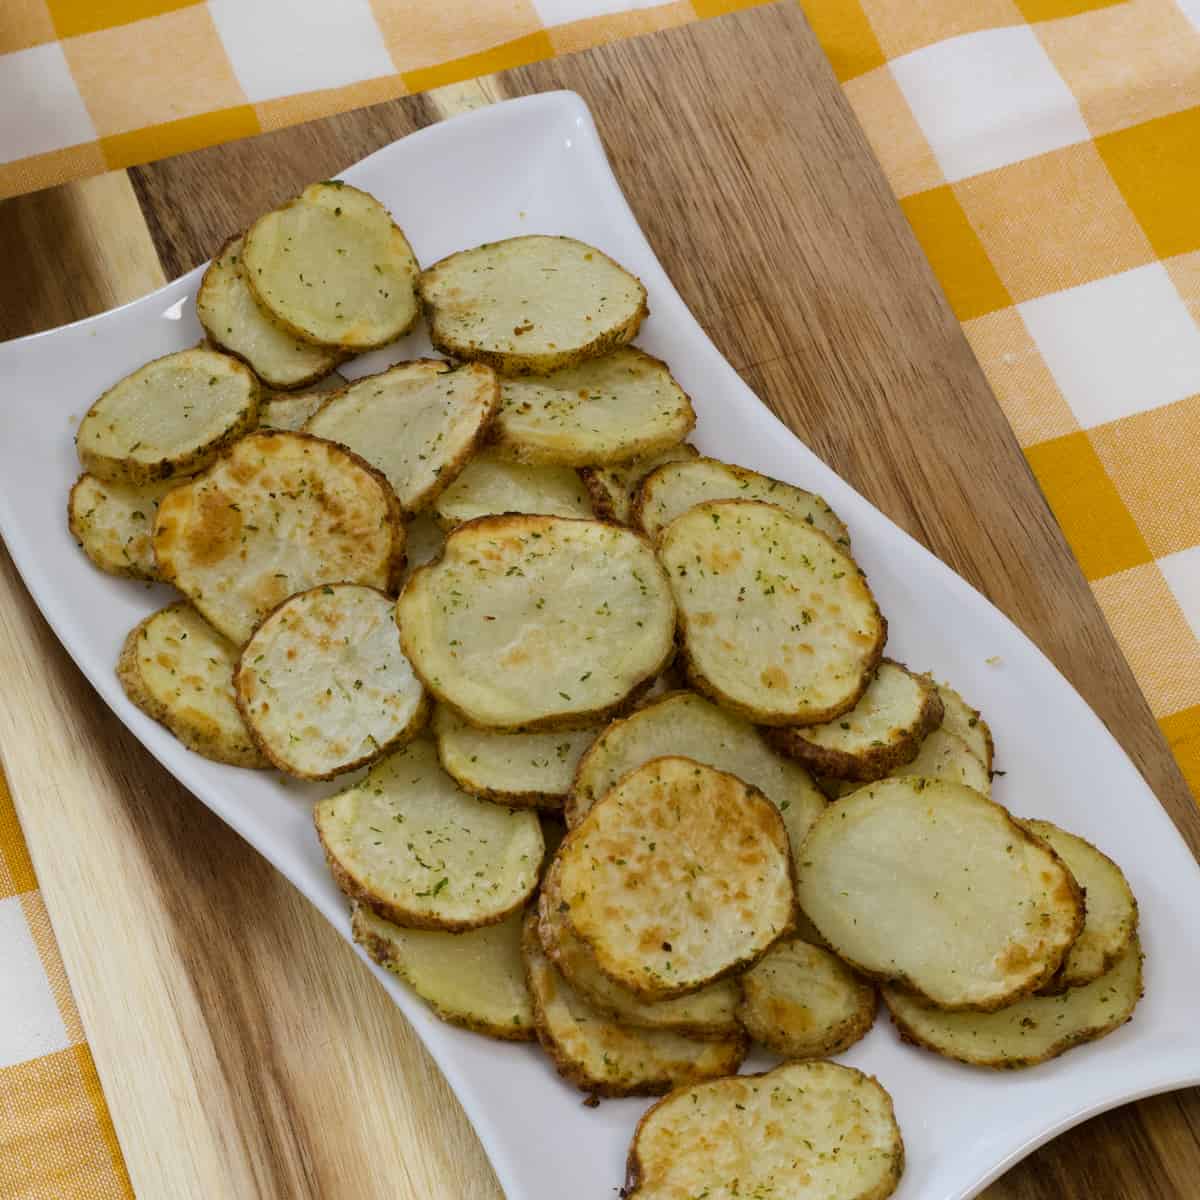 https://www.mindyscookingobsession.com/wp-content/uploads/2023/01/Sliced-Potatoes-in-the-Air-Fryer-1200.jpg